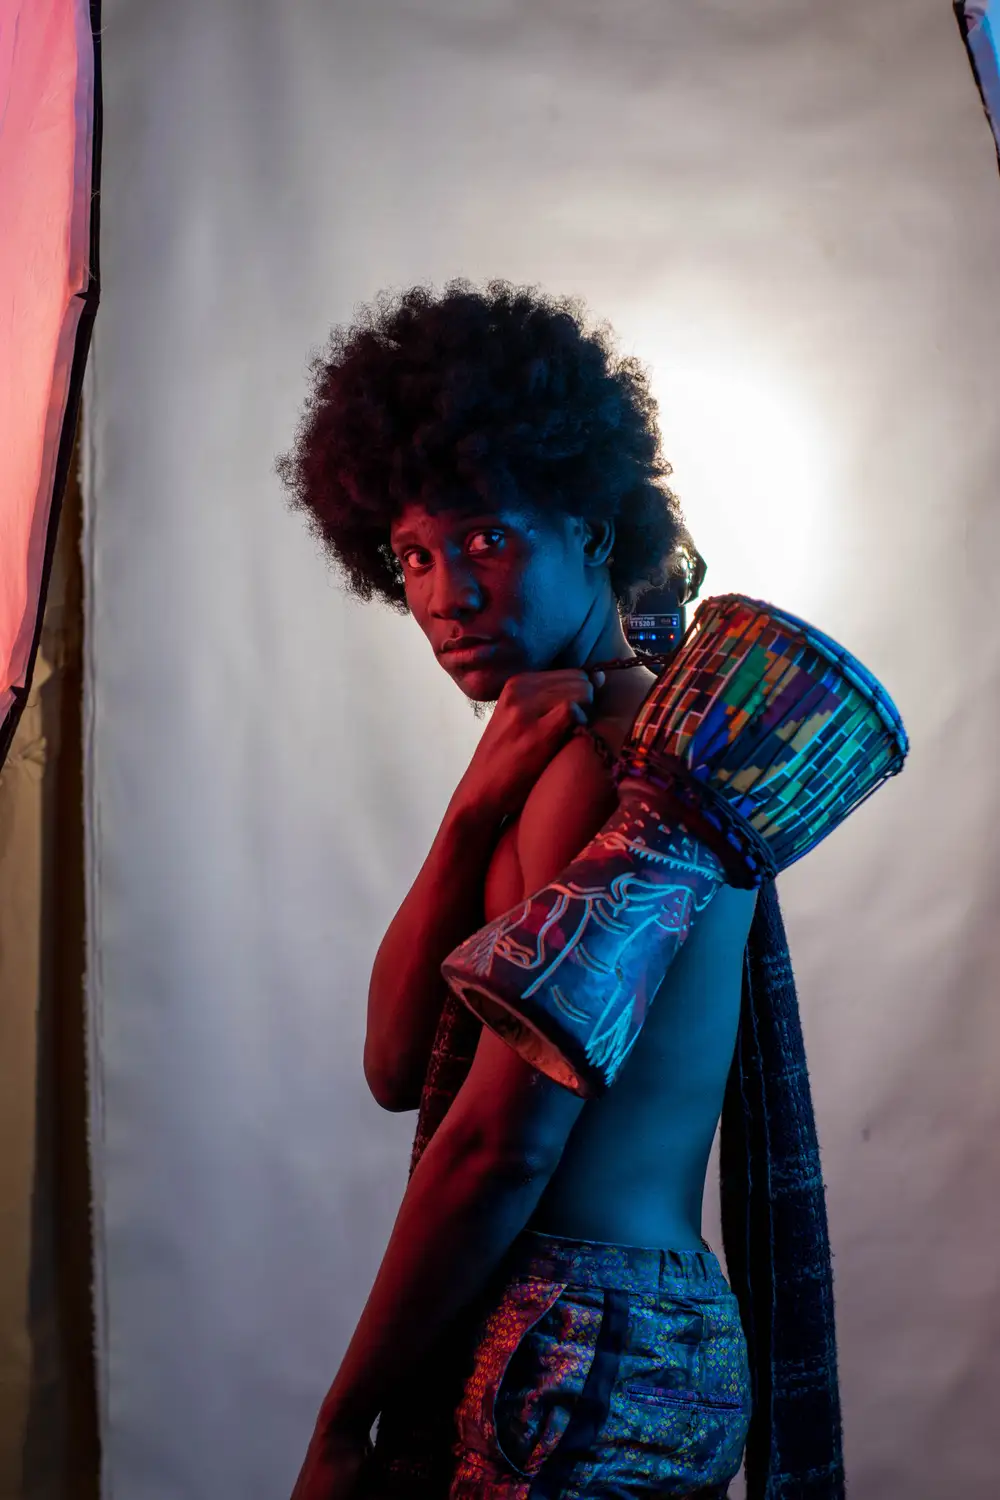 model on afro holds his drum from the back